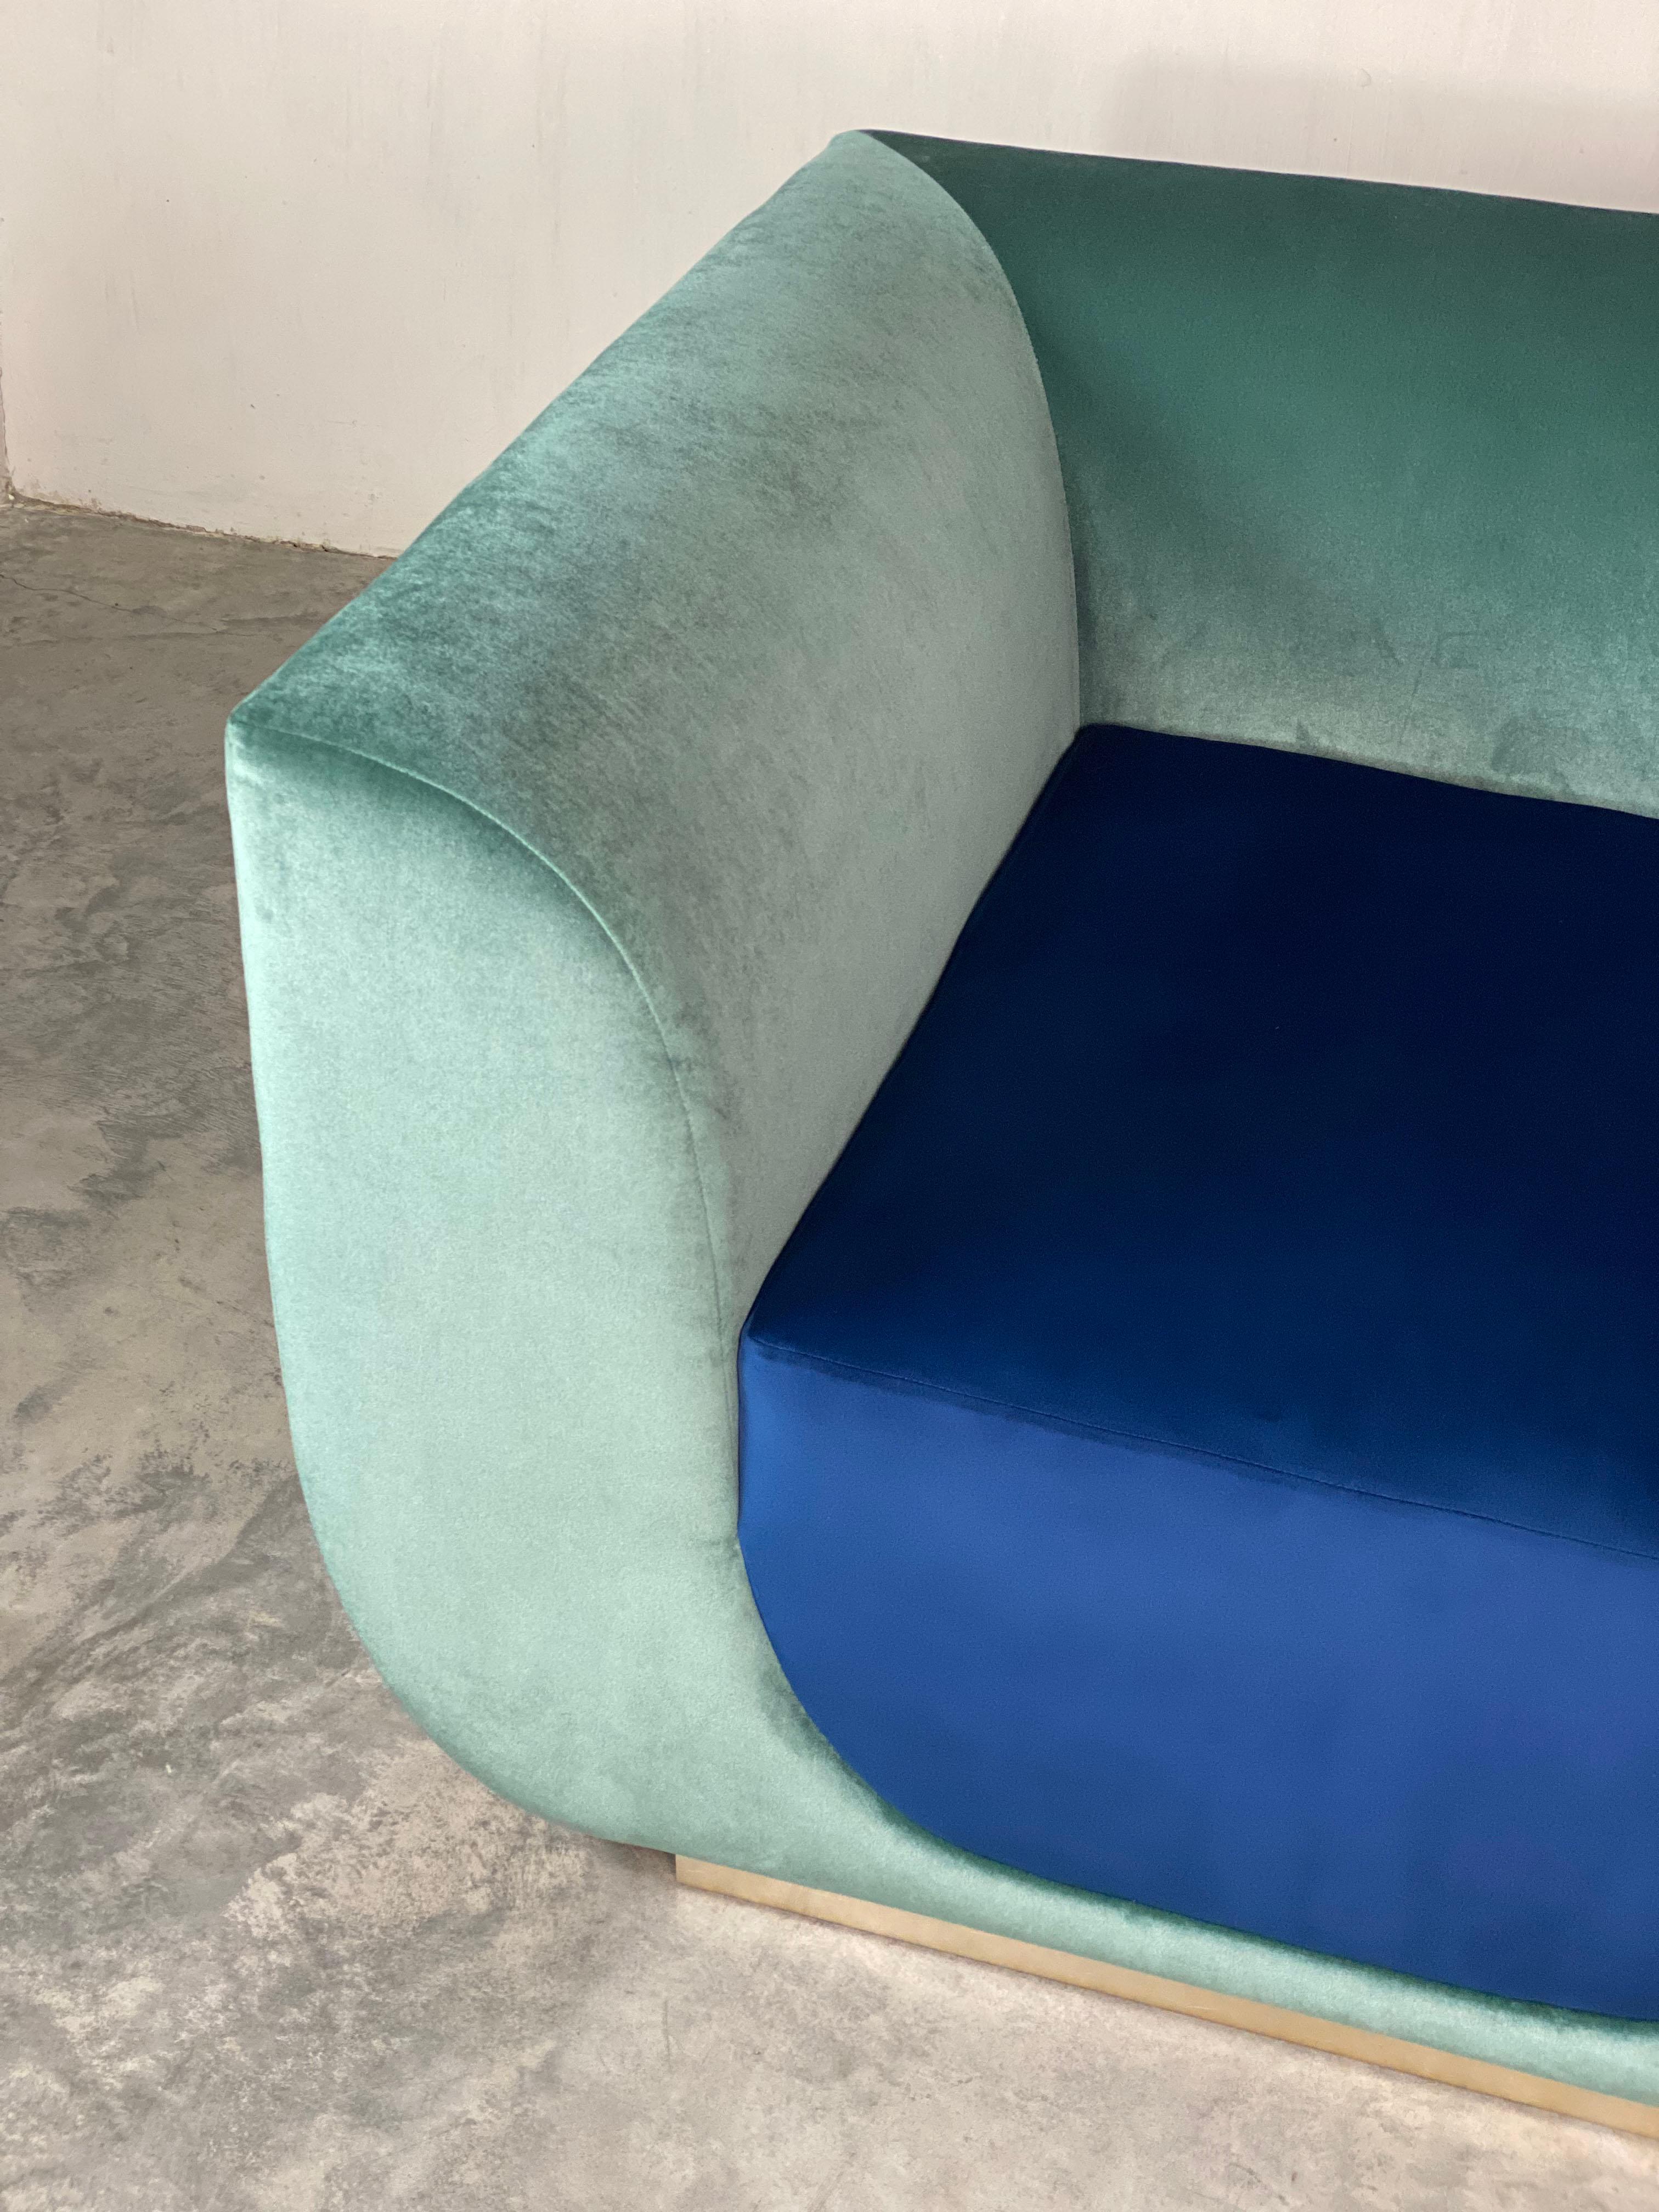 “ABYSS” armchair in mint and ocean blue velvet 

When you look into an abyss, the abyss also looks into you.

The abyssal zone or abyssopelagic zone is a layer of the pelagic zone of the ocean. 